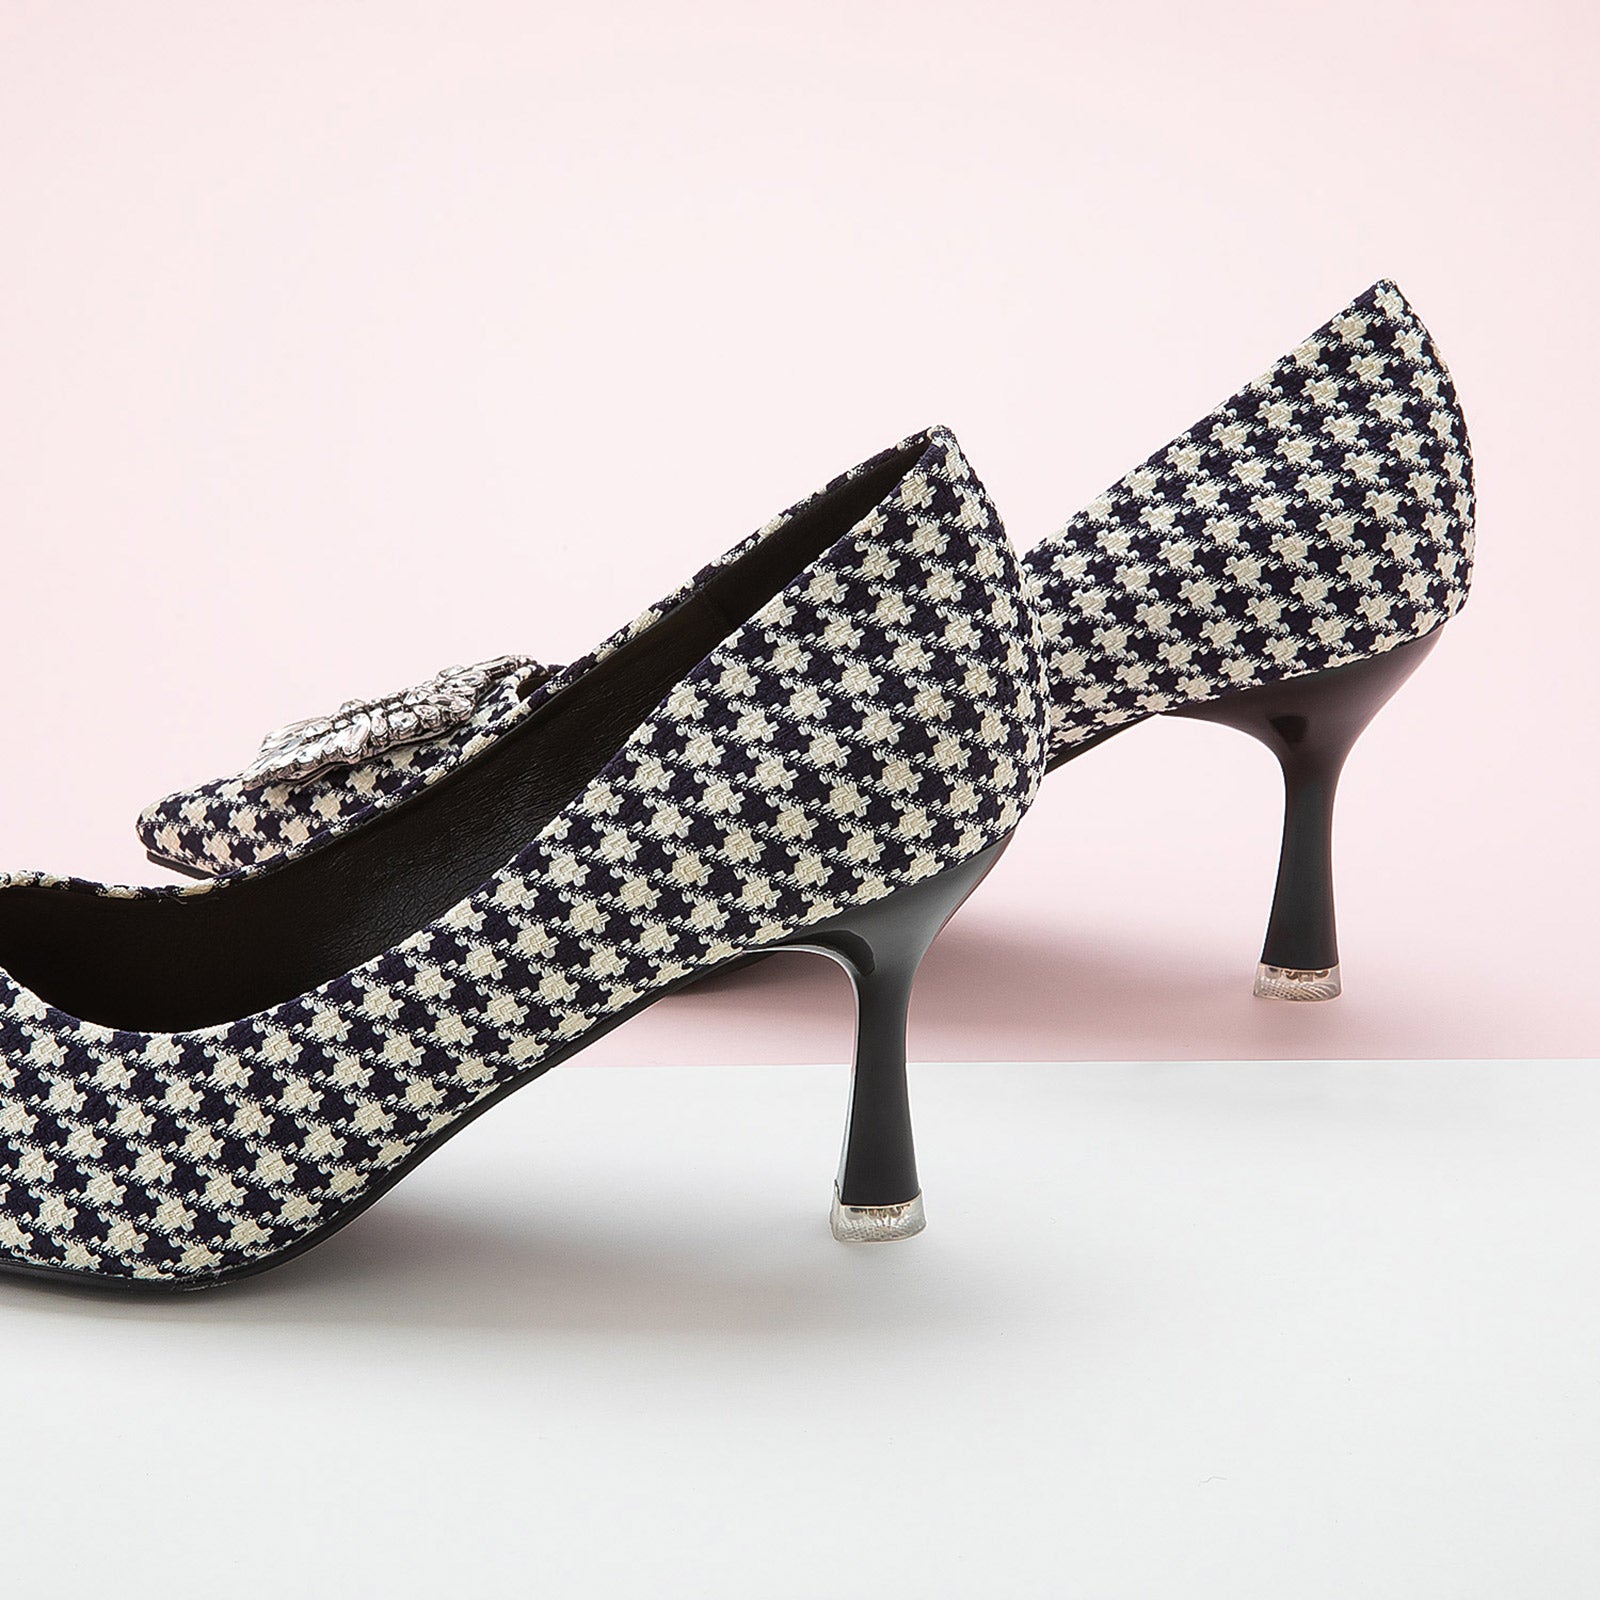 Houndstooth Tweed Pumps with unique square buckle details, perfect for professional settings.